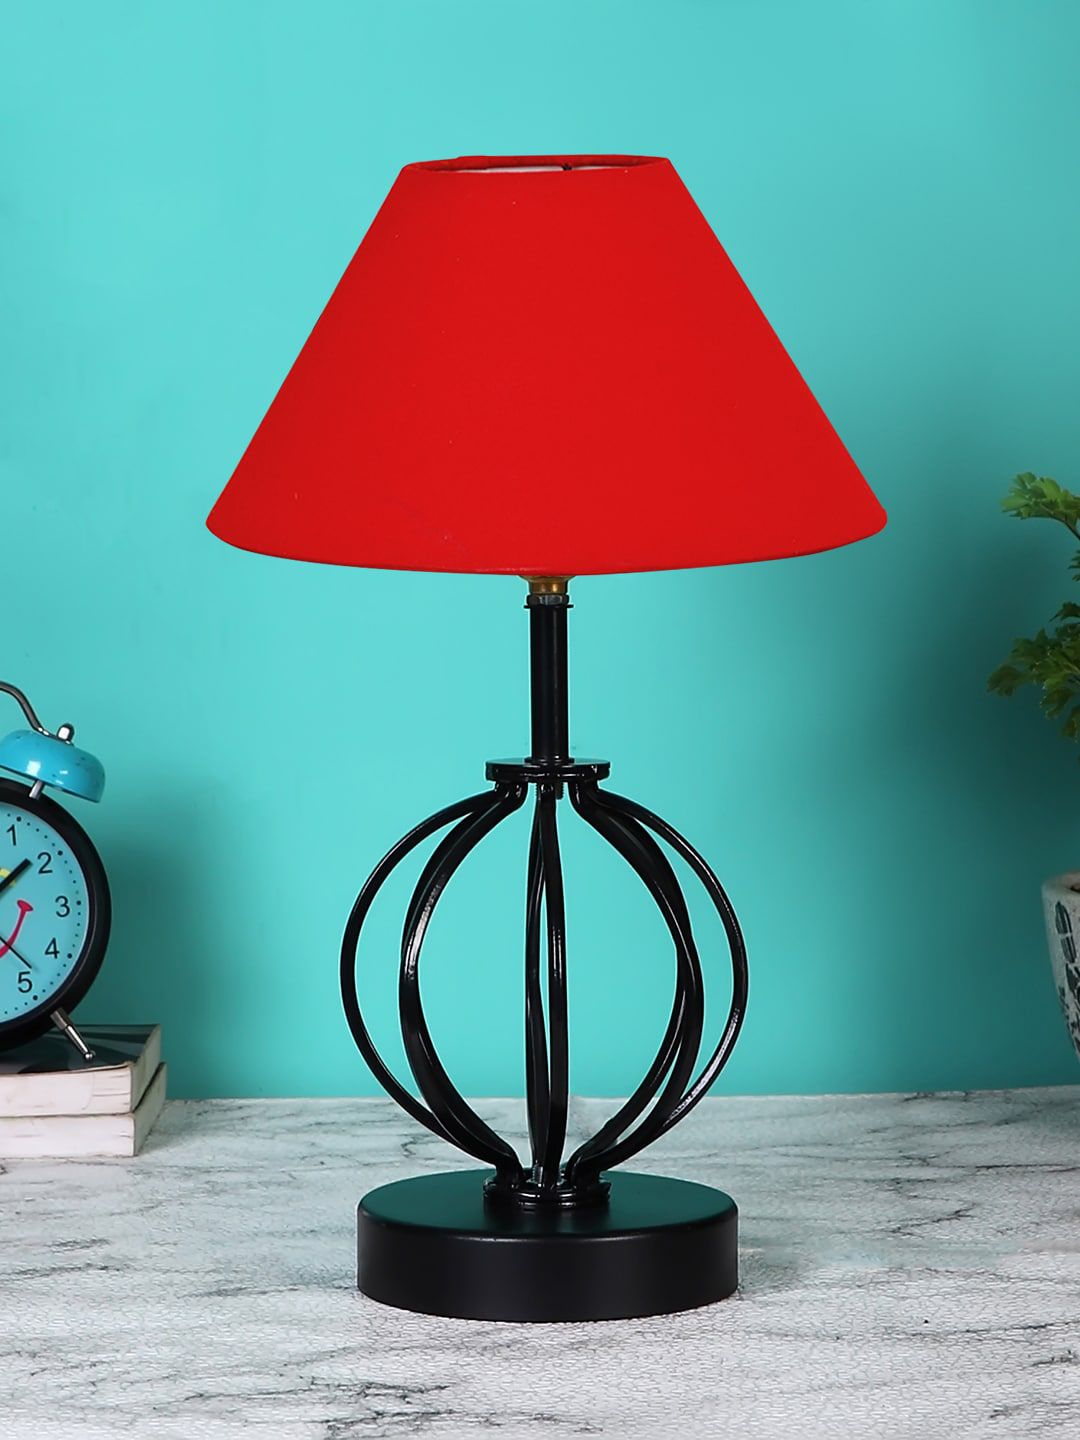 DevanshSolid Table Lamps Price in India